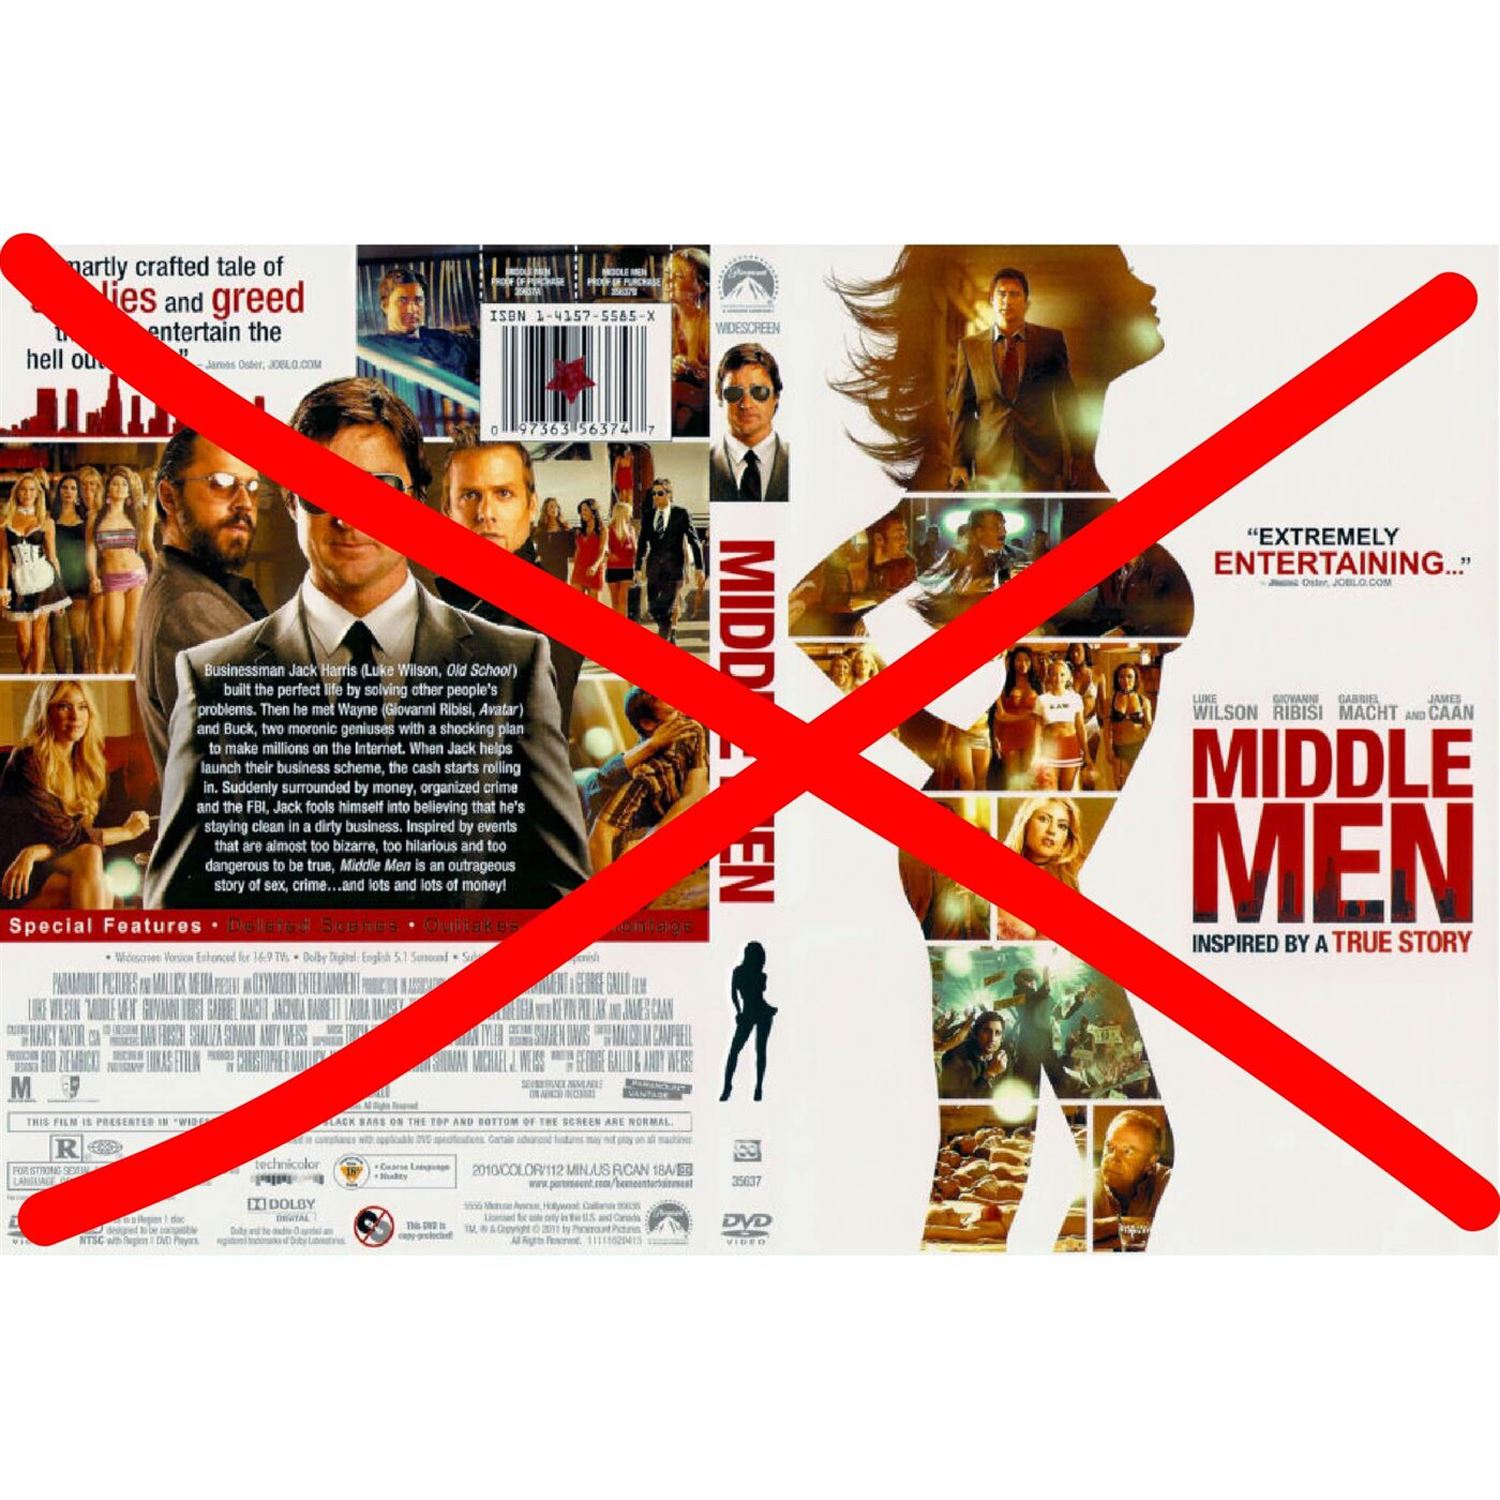 No middle men on the path